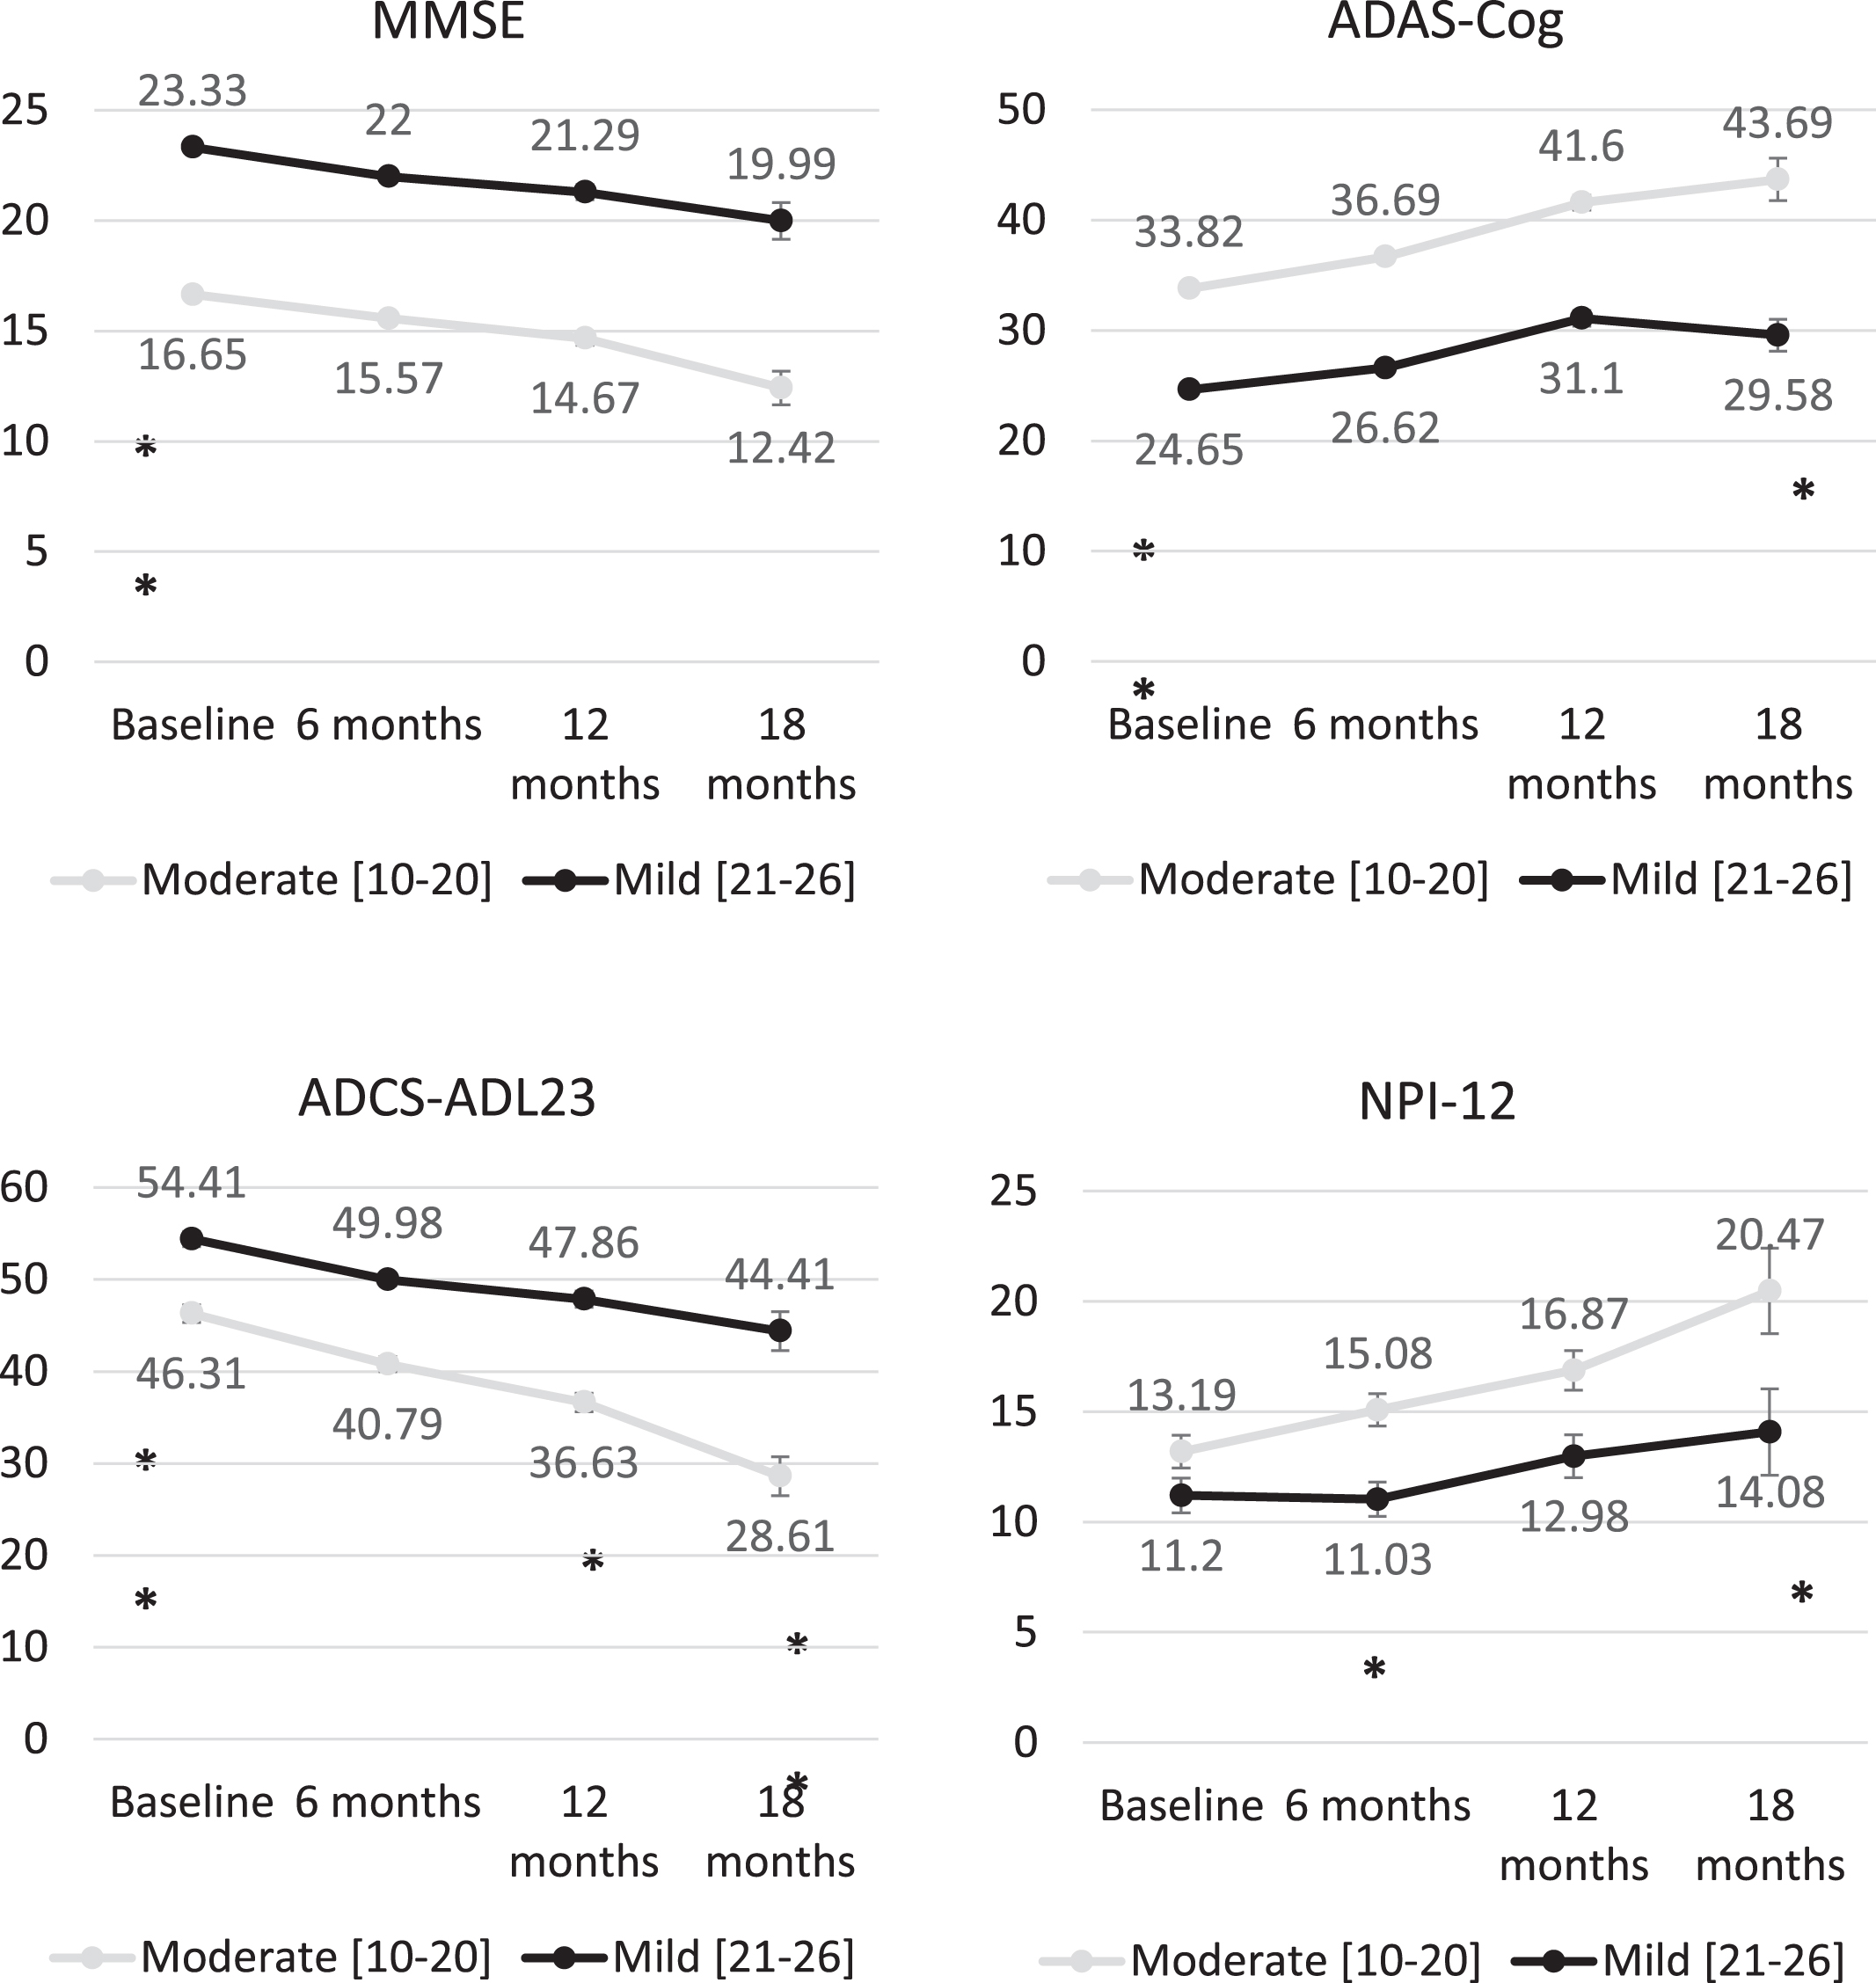 Changes in MMSE, ADAS-Cog, ADCS-DL23, and NPI-12 scores over time from baseline stratifying by AD severity. Statistical comparisons performed to compare the change for the different tools between the different follow-up points. ***p < 0.001; **p < 0.01; *p < 0.05.